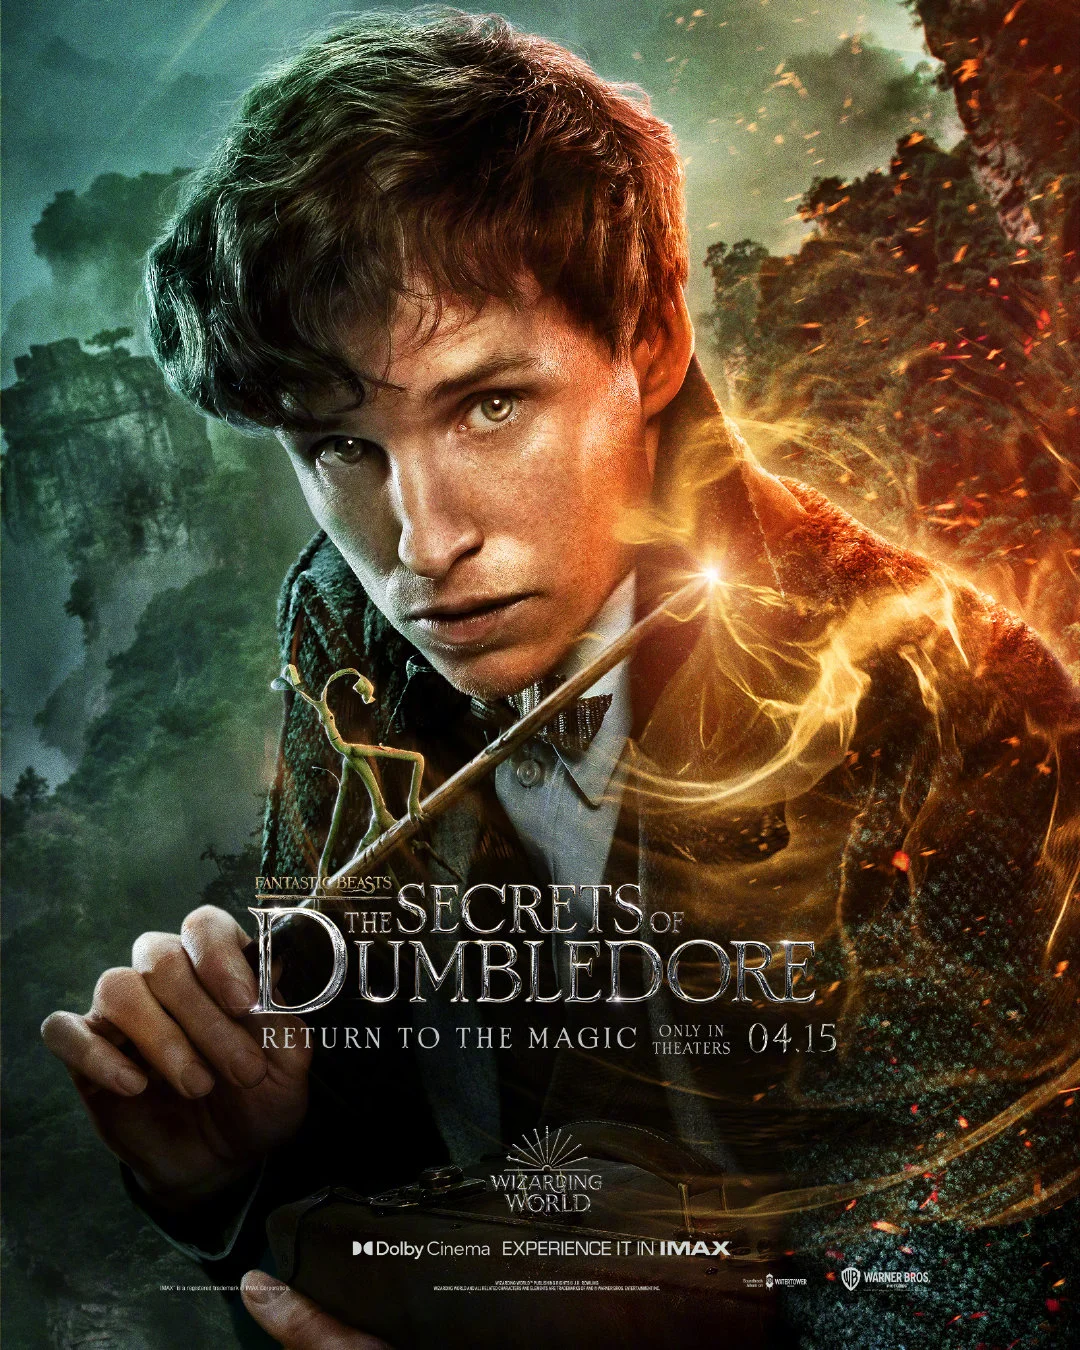 fantastic-beasts-the-secrets-of-dumbledore-releases-multiple-character-posters-2